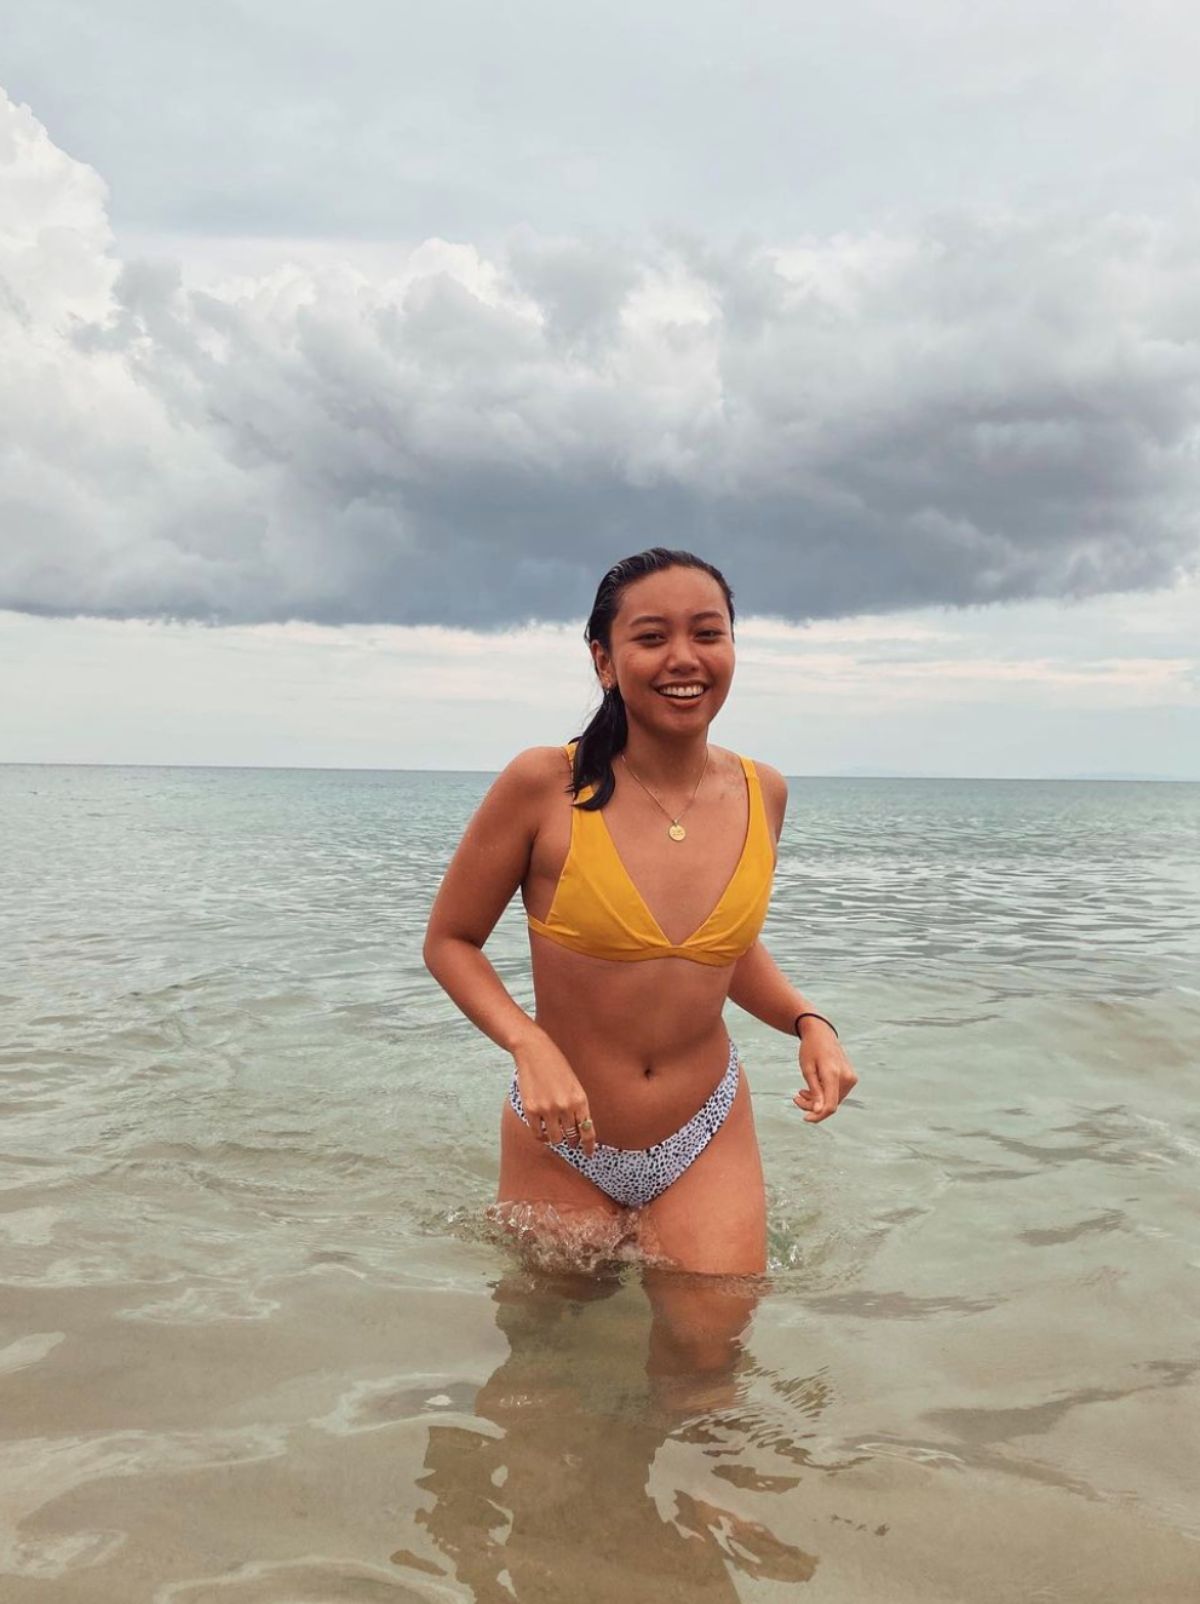 skin and body positivity posts from filipino influencers